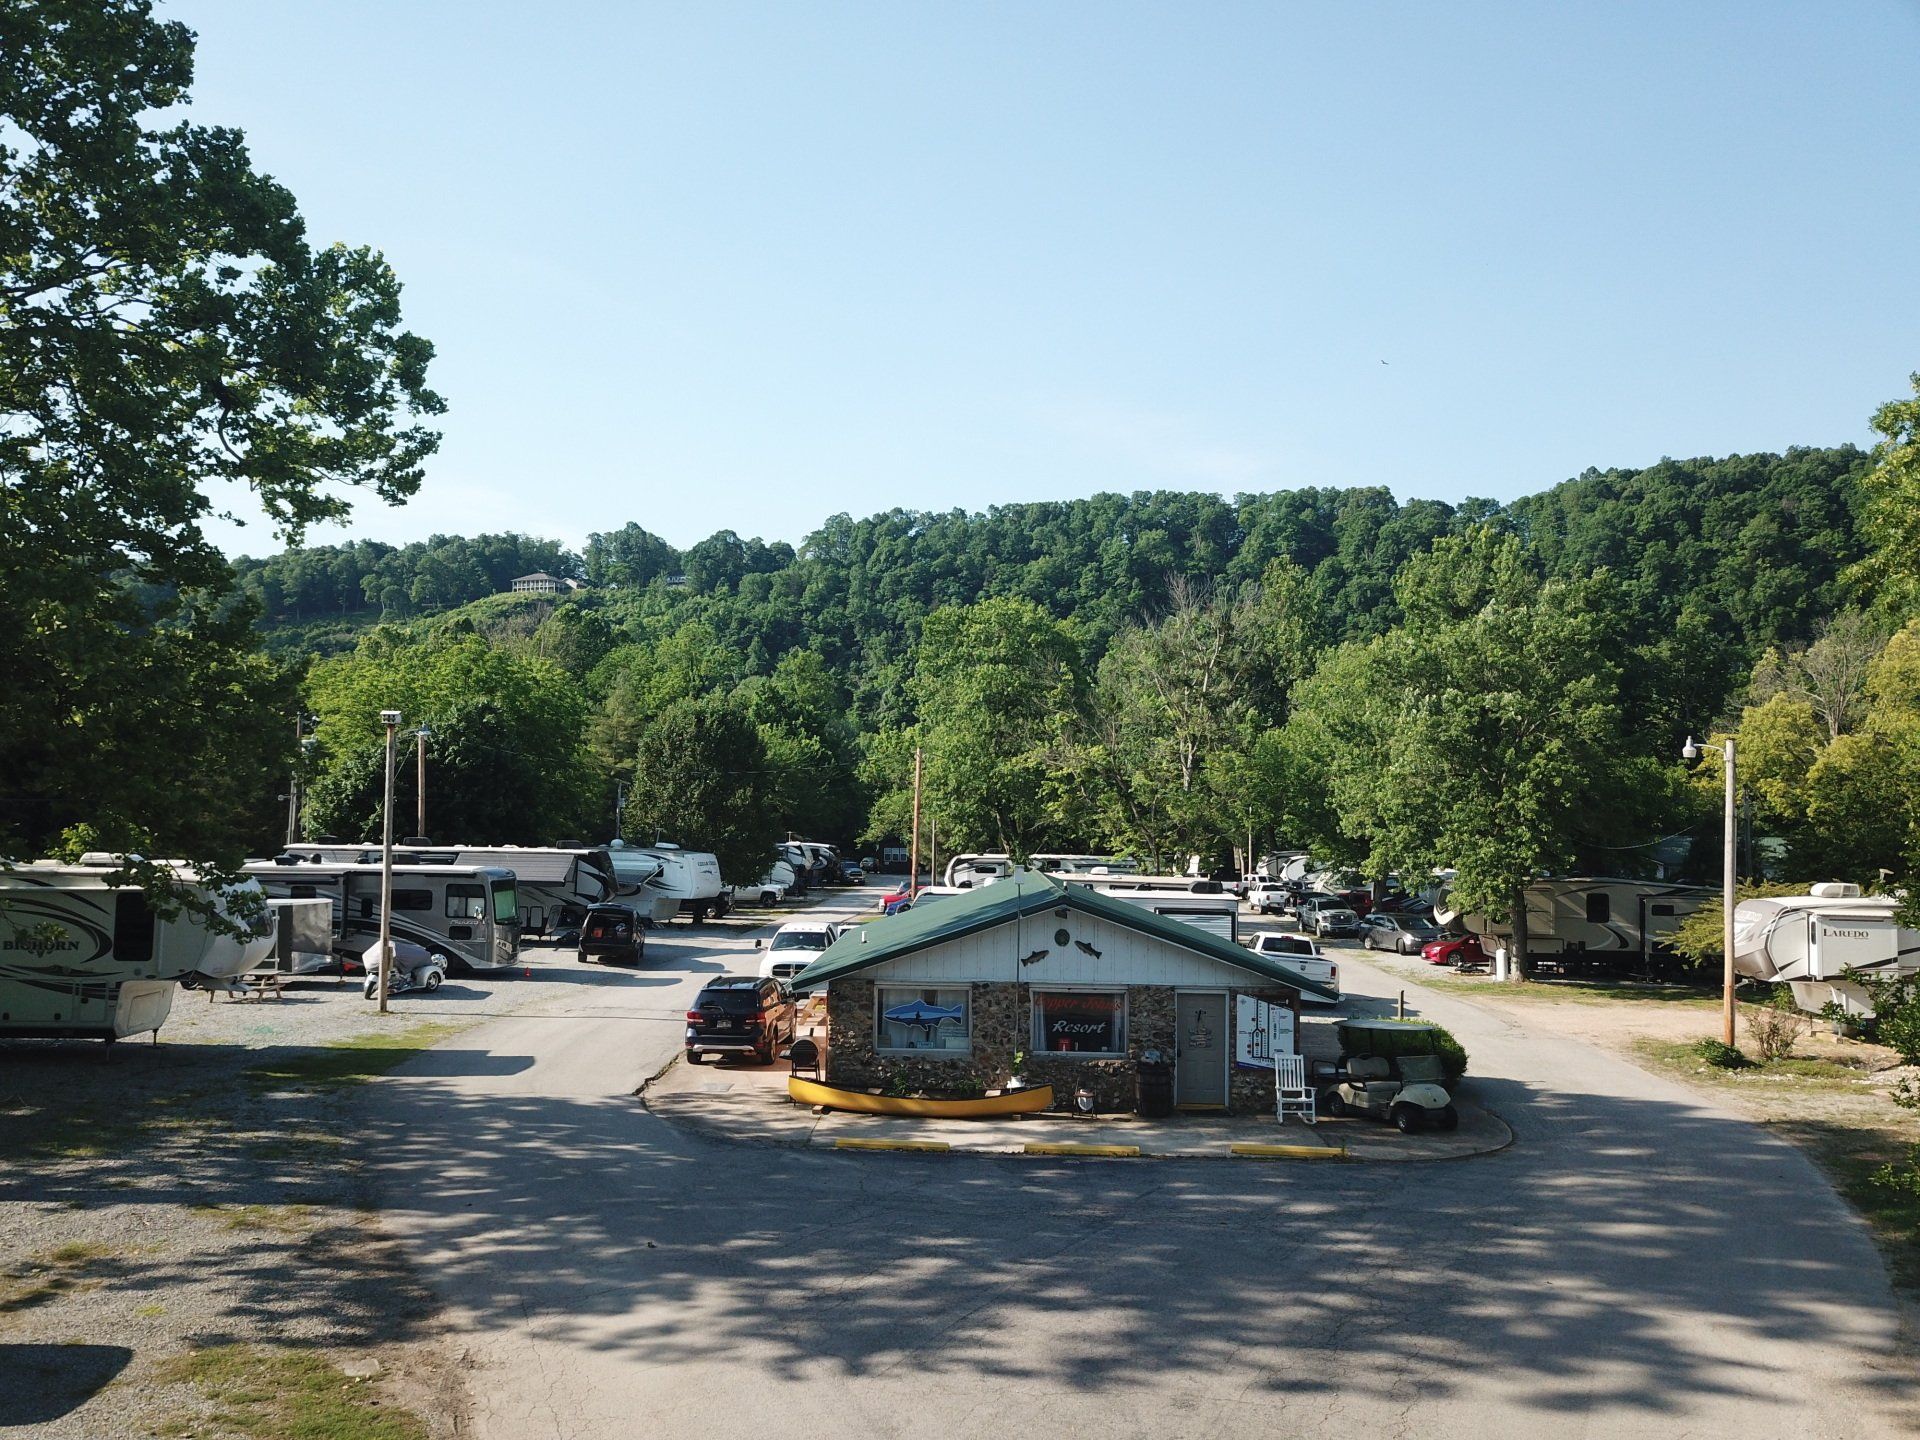 50 RV sites available.